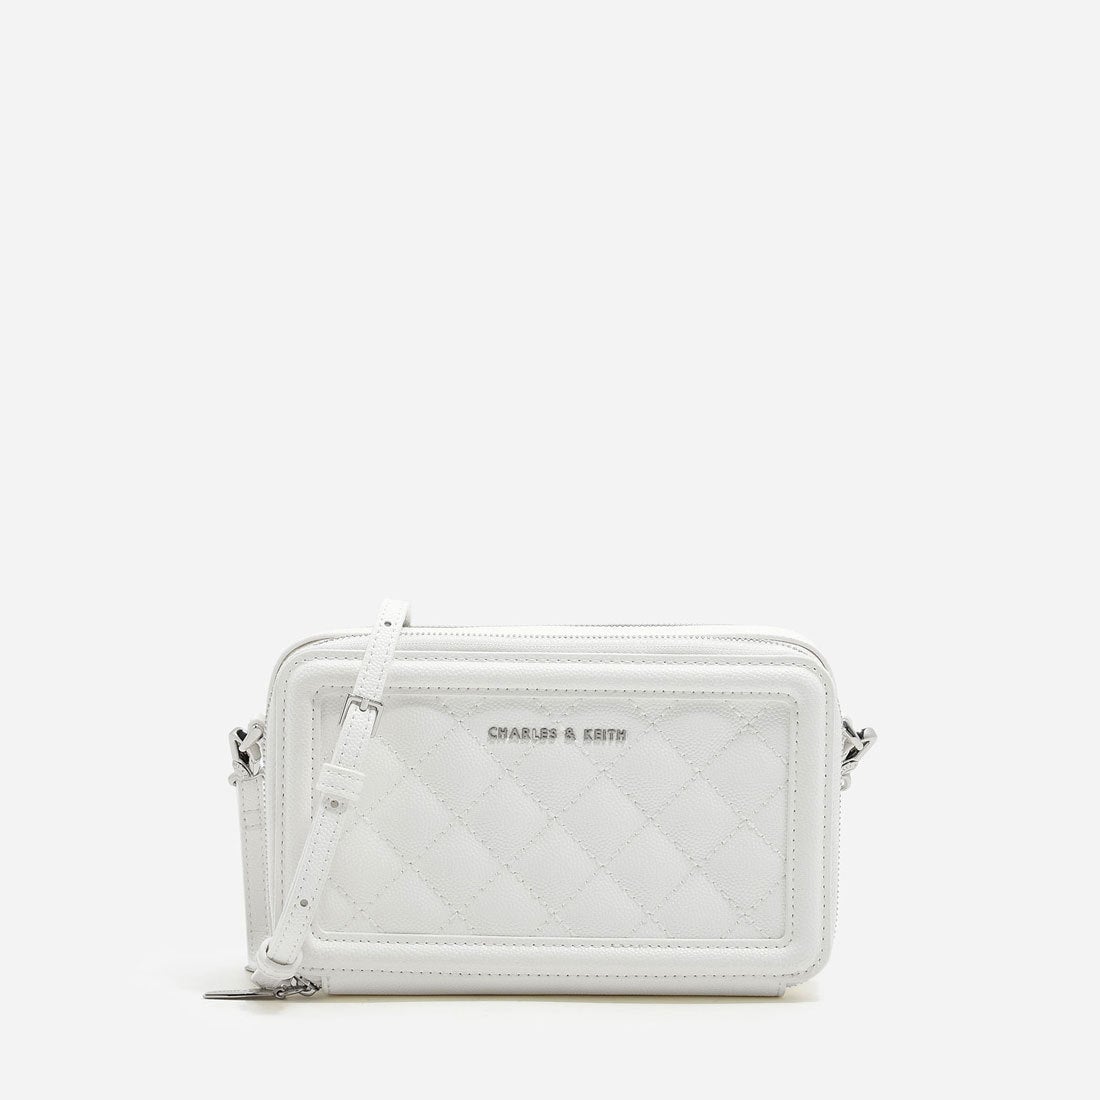 CHARLES & KEITH キルト ロングウォレット / QUILTED LONG WALLET 